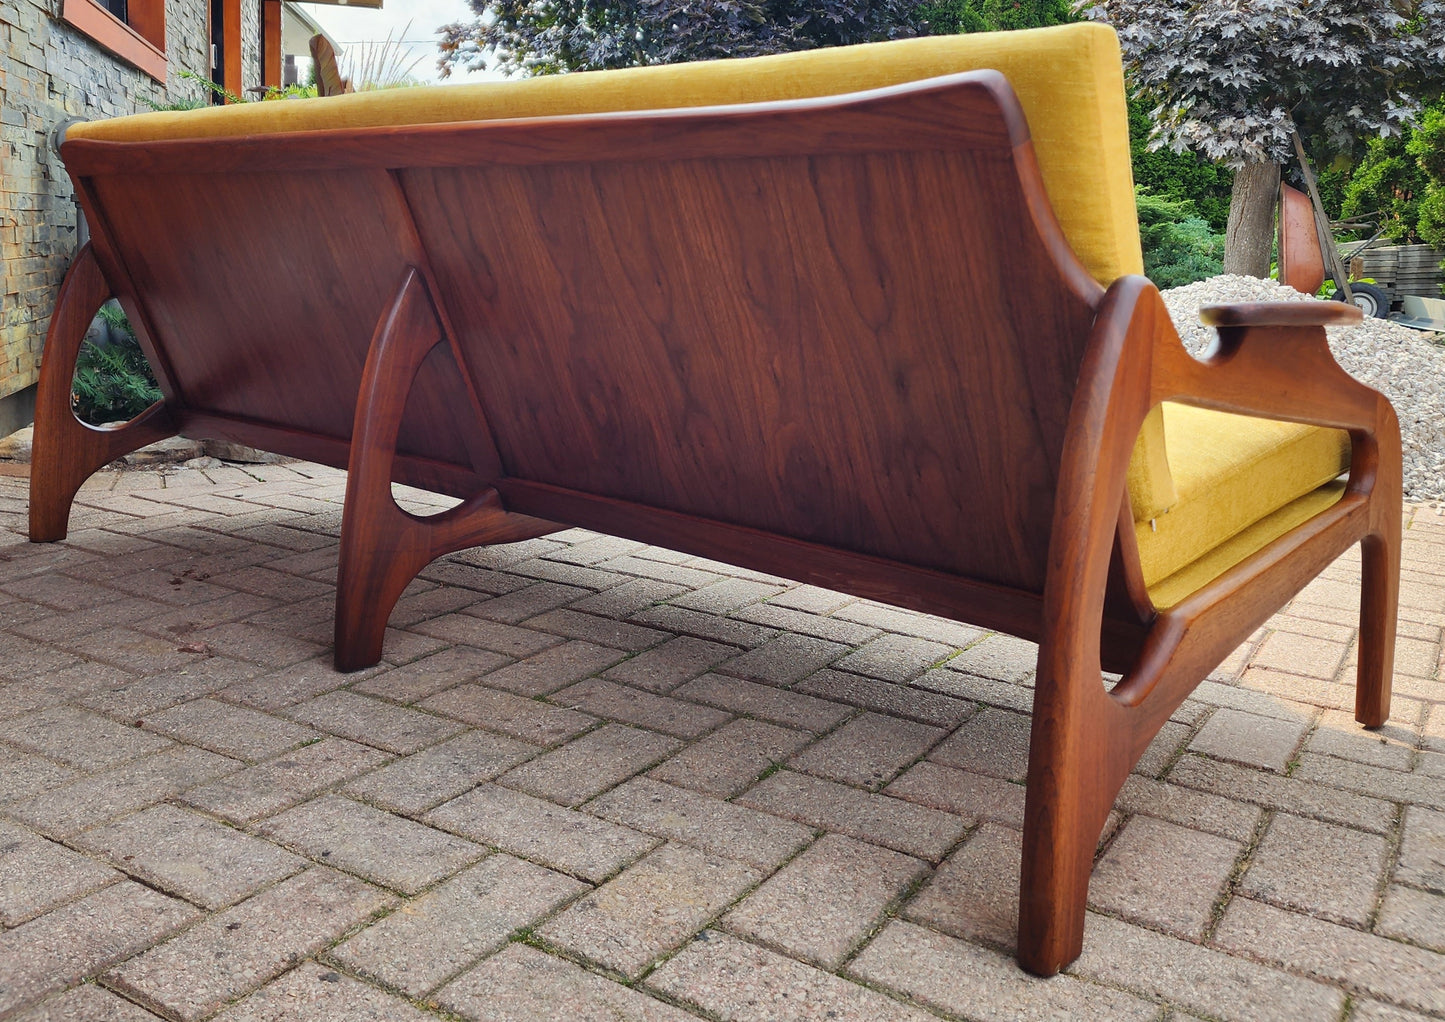 REFINISHED REUPHOLSTERED Mid Century Modern  Adrian Pearsall Sofa 80"